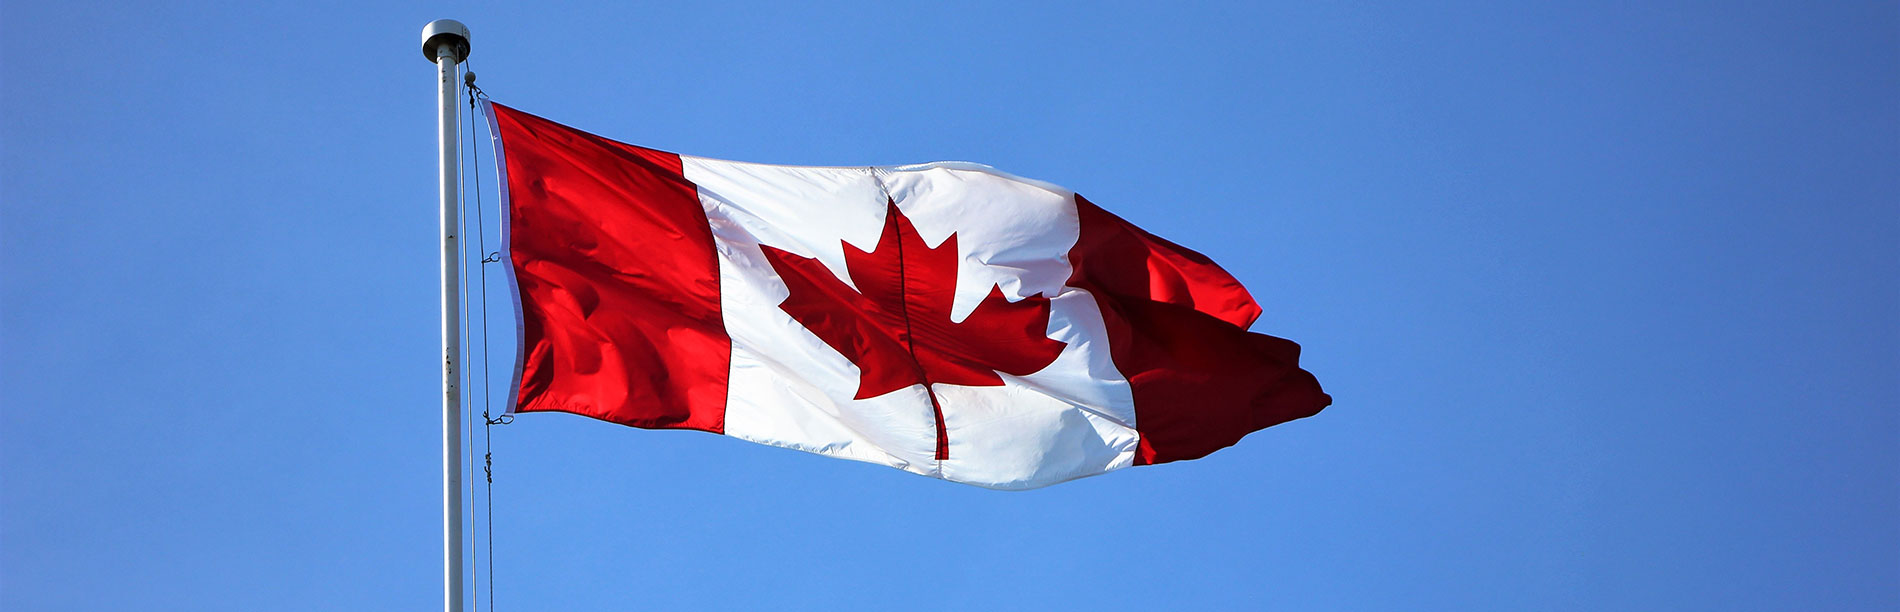 The red and white Canada flag flies on a flagpole with a blue sky background.